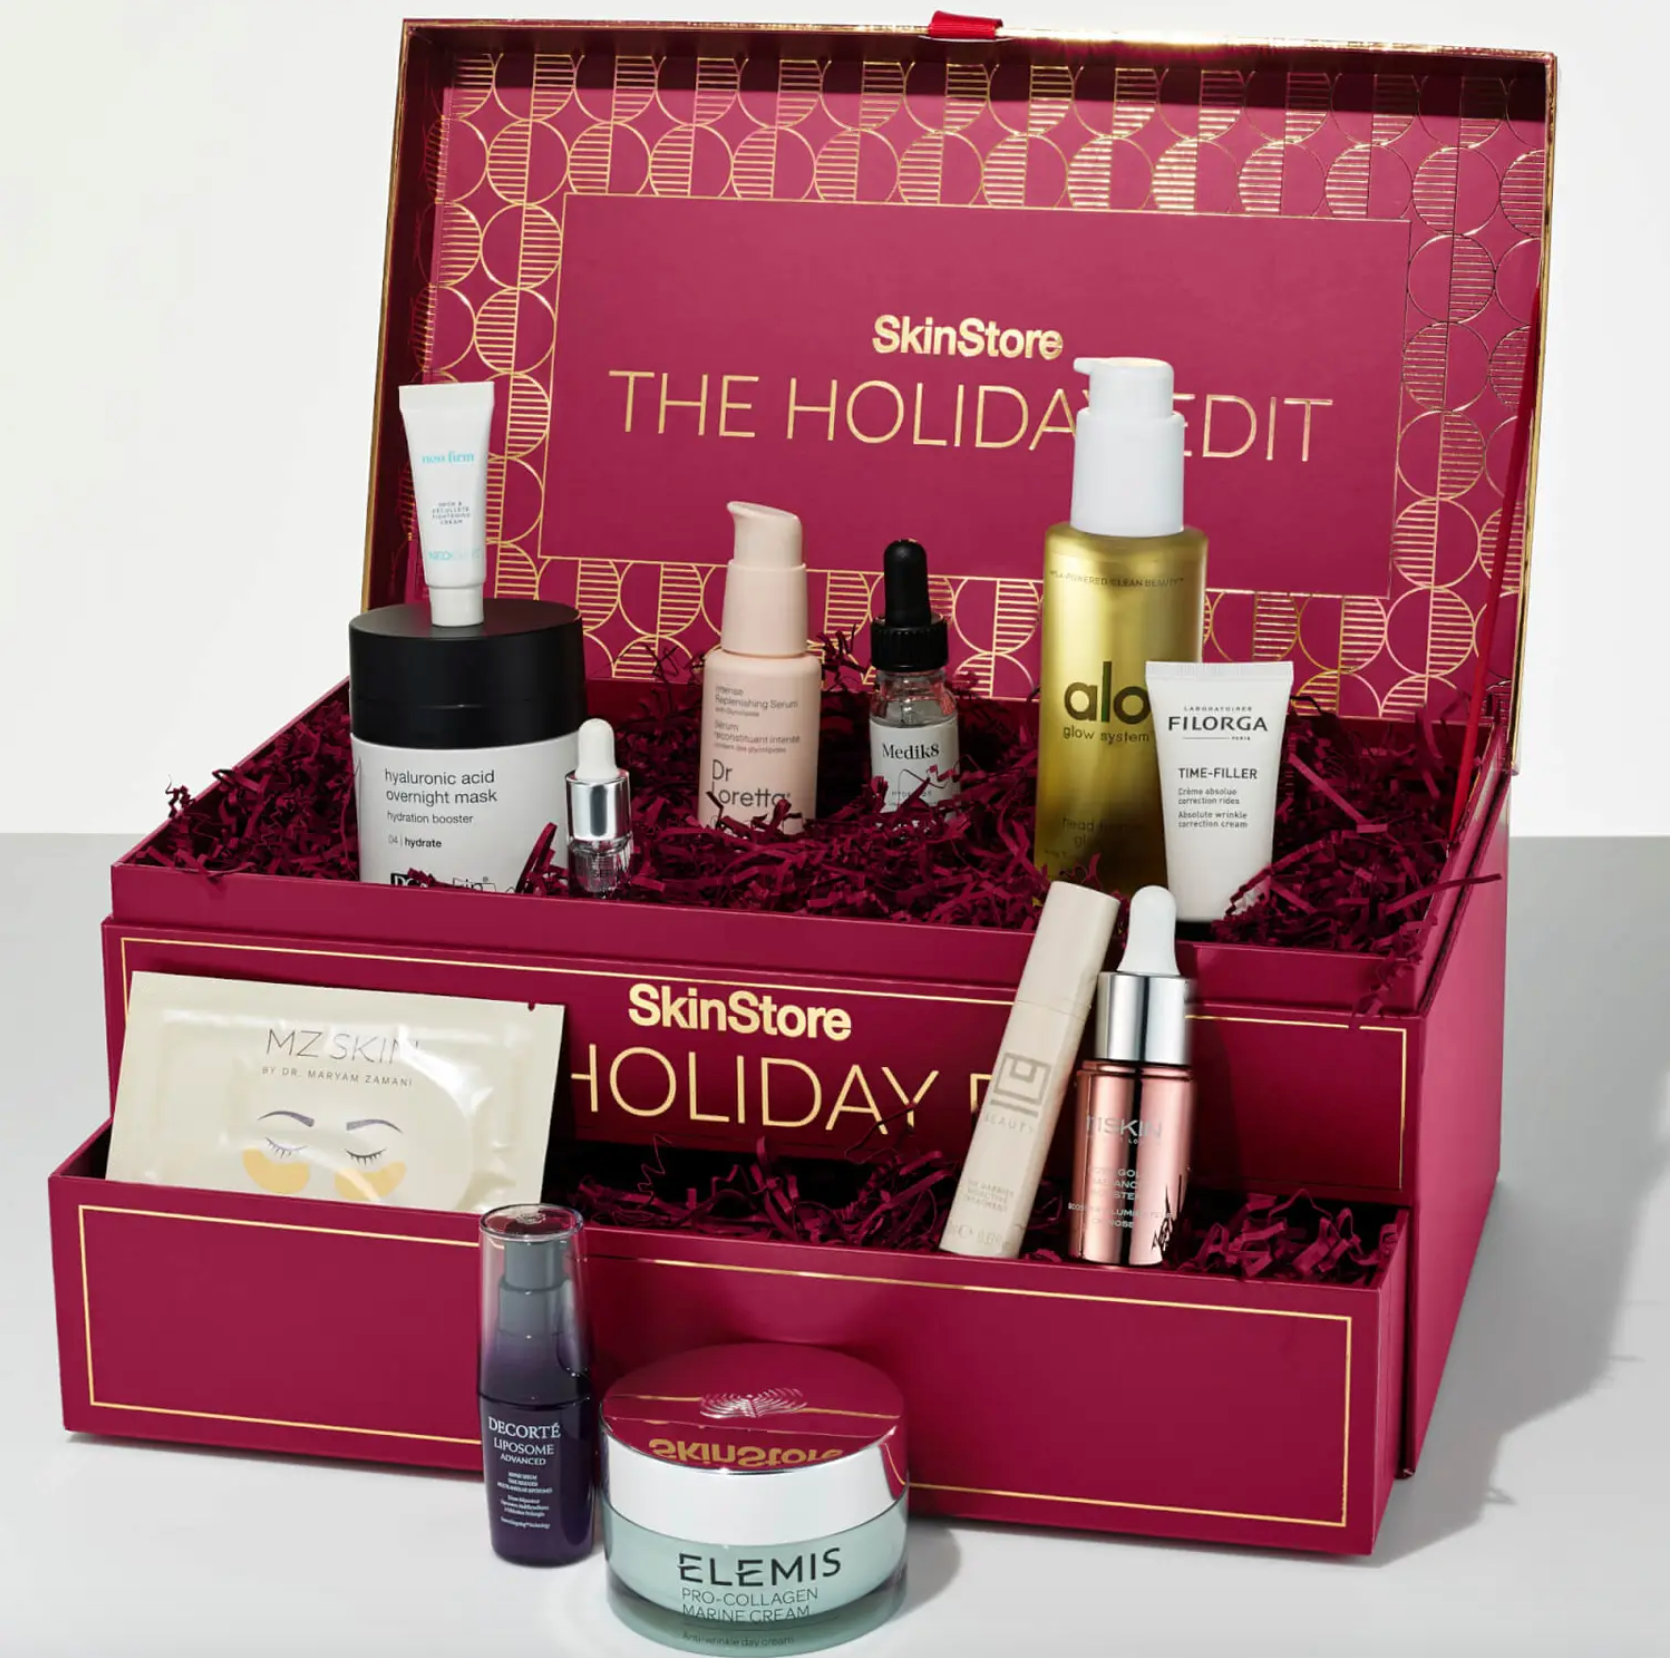 Skinstore Holiday Edit 2022 Contents